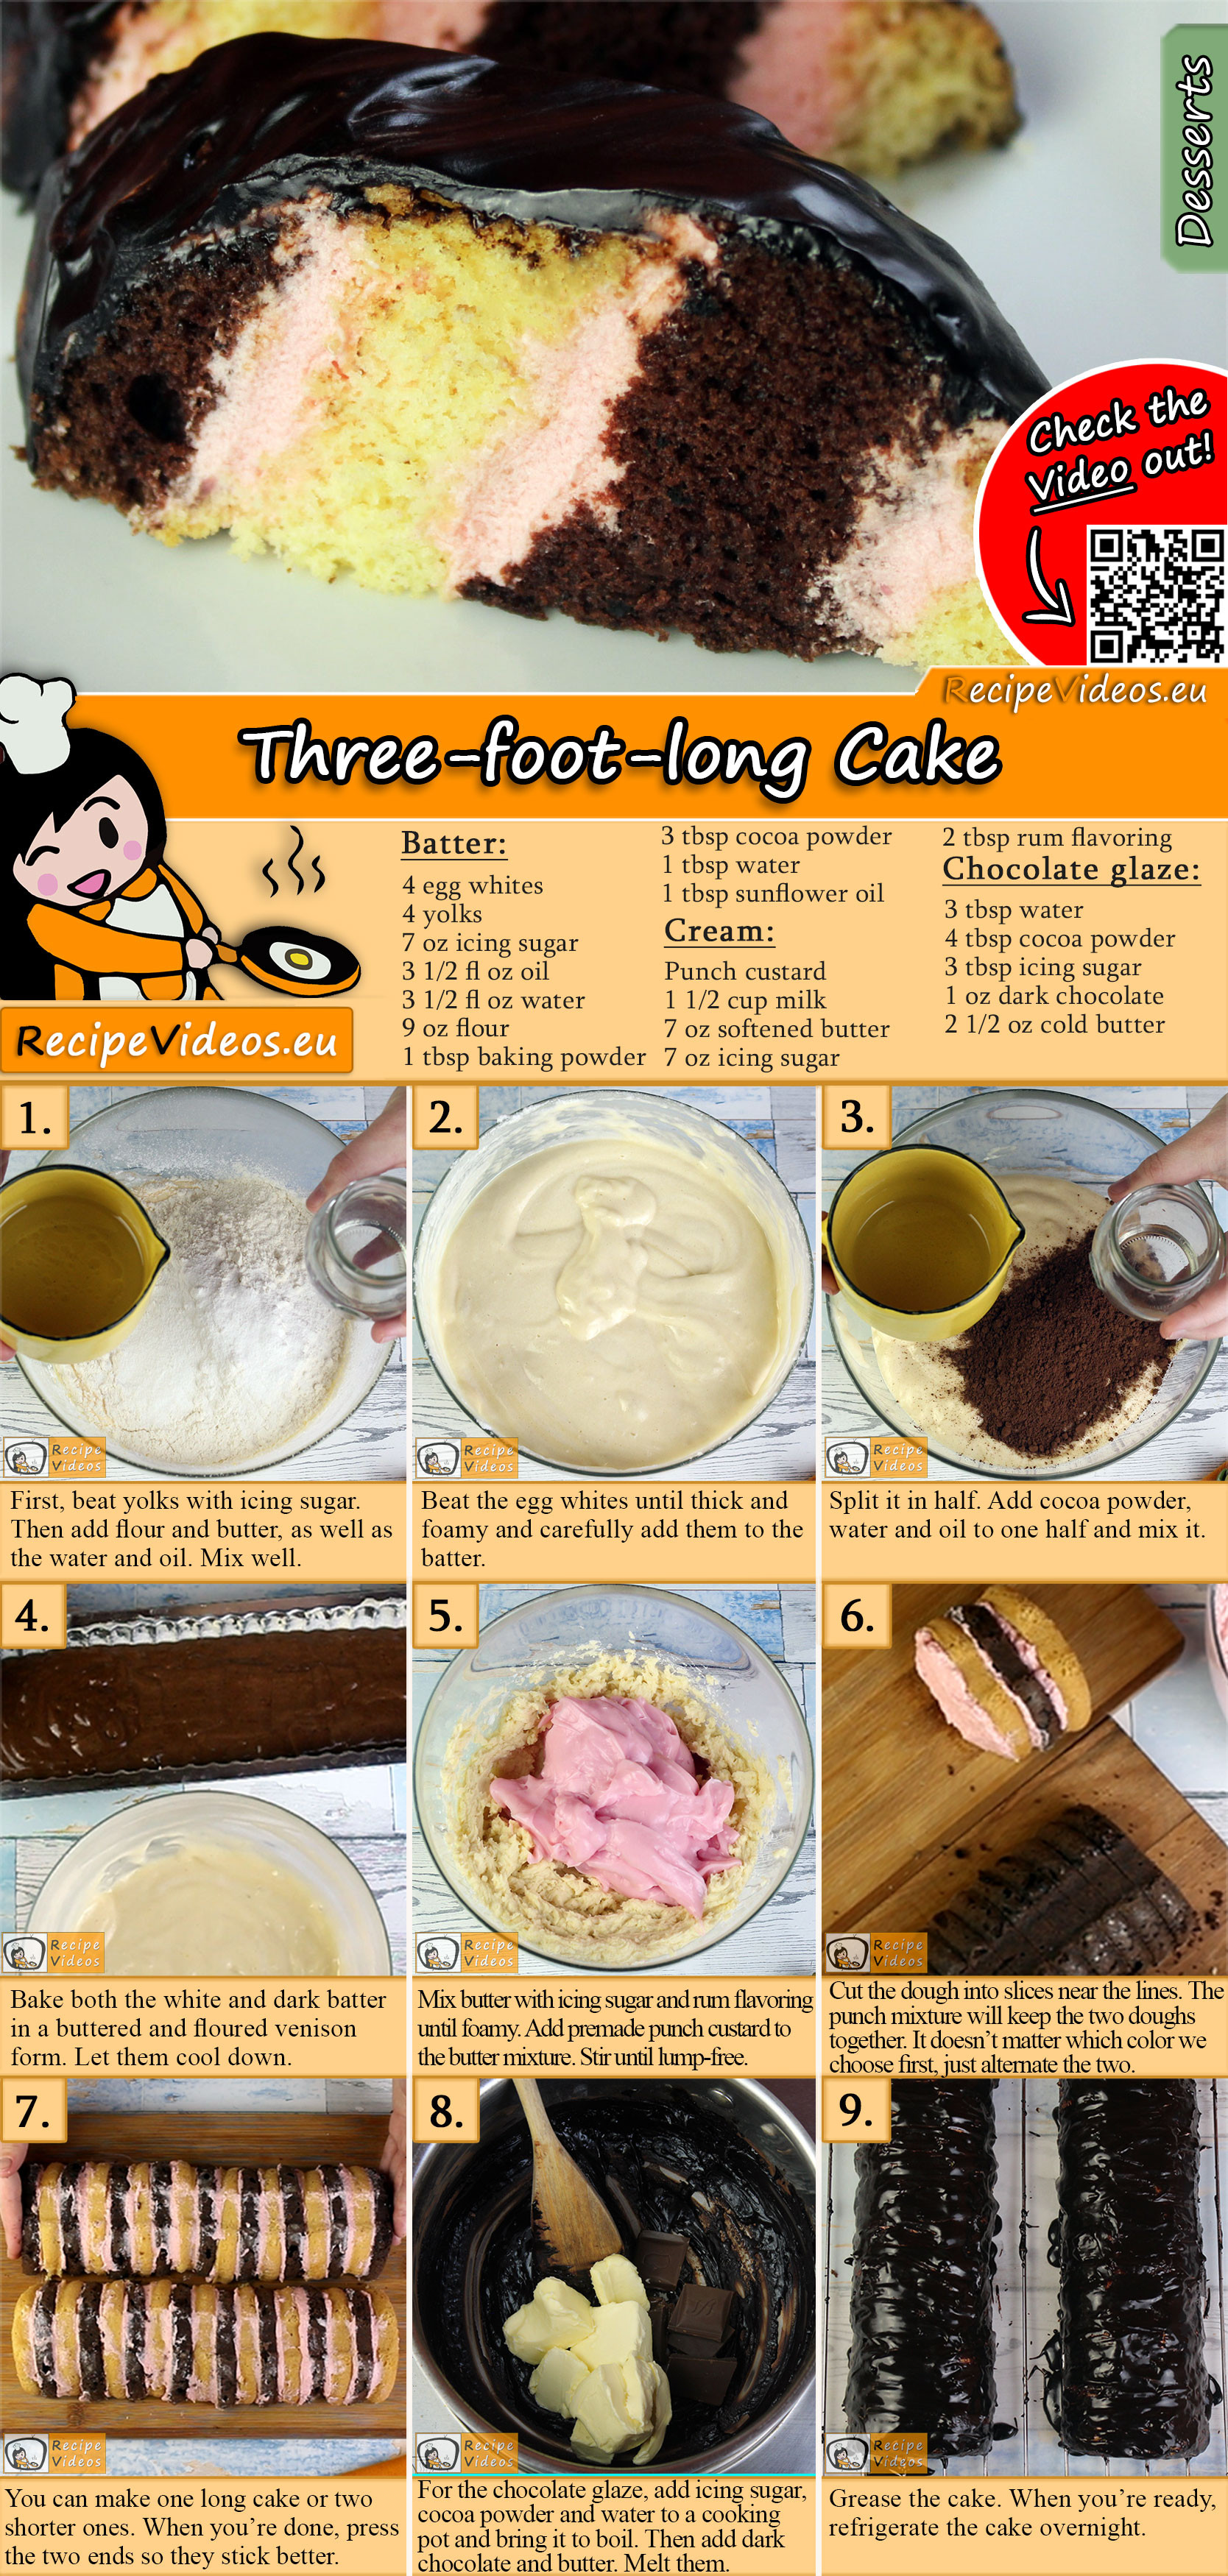 Three-foot-long Cake recipe with video